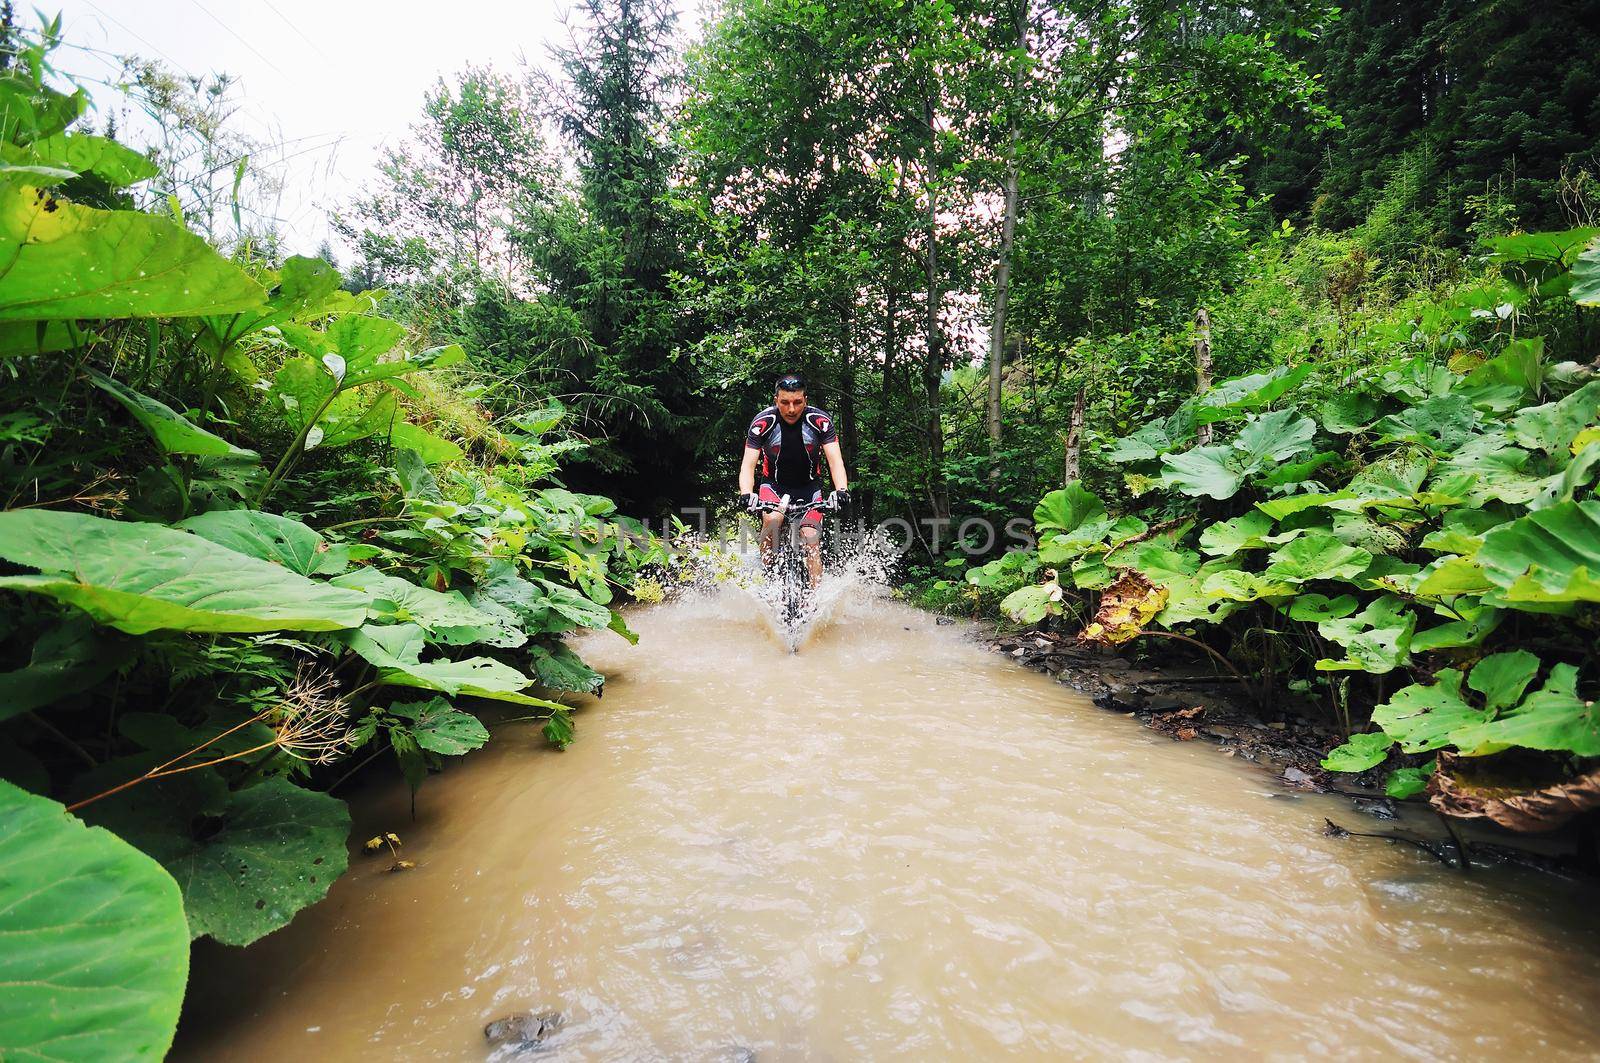 young man drive mountain bike over water river